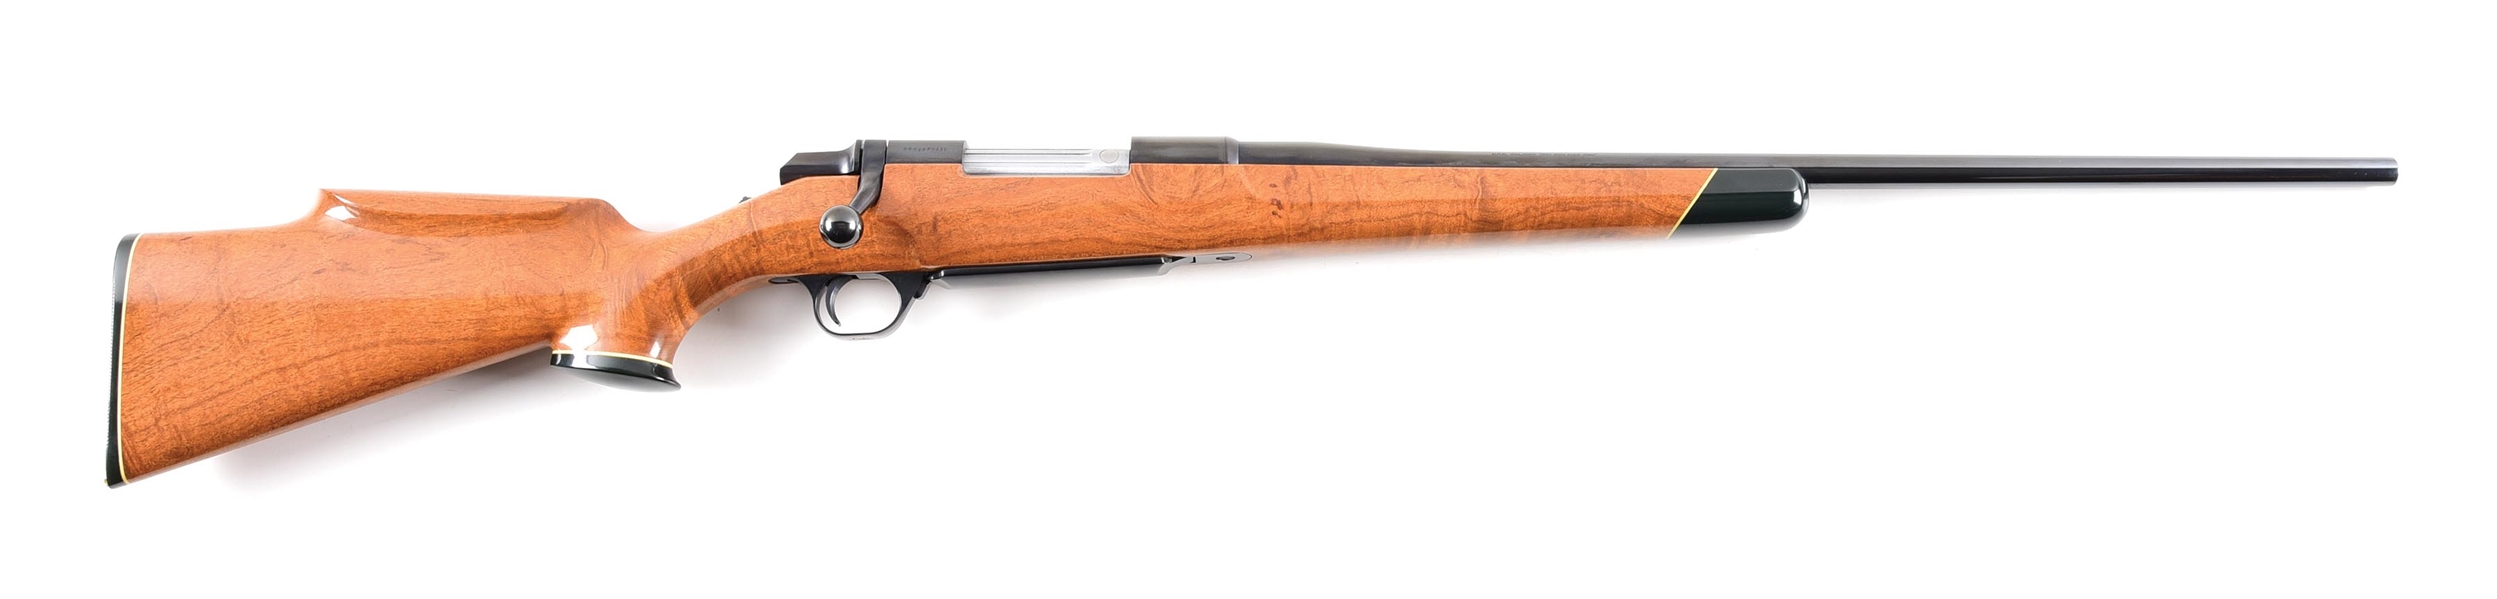 (M) BROWNING BBR BOLT ACTION RIFLE WITH MESQUITE (FLAT POD) STOCK.